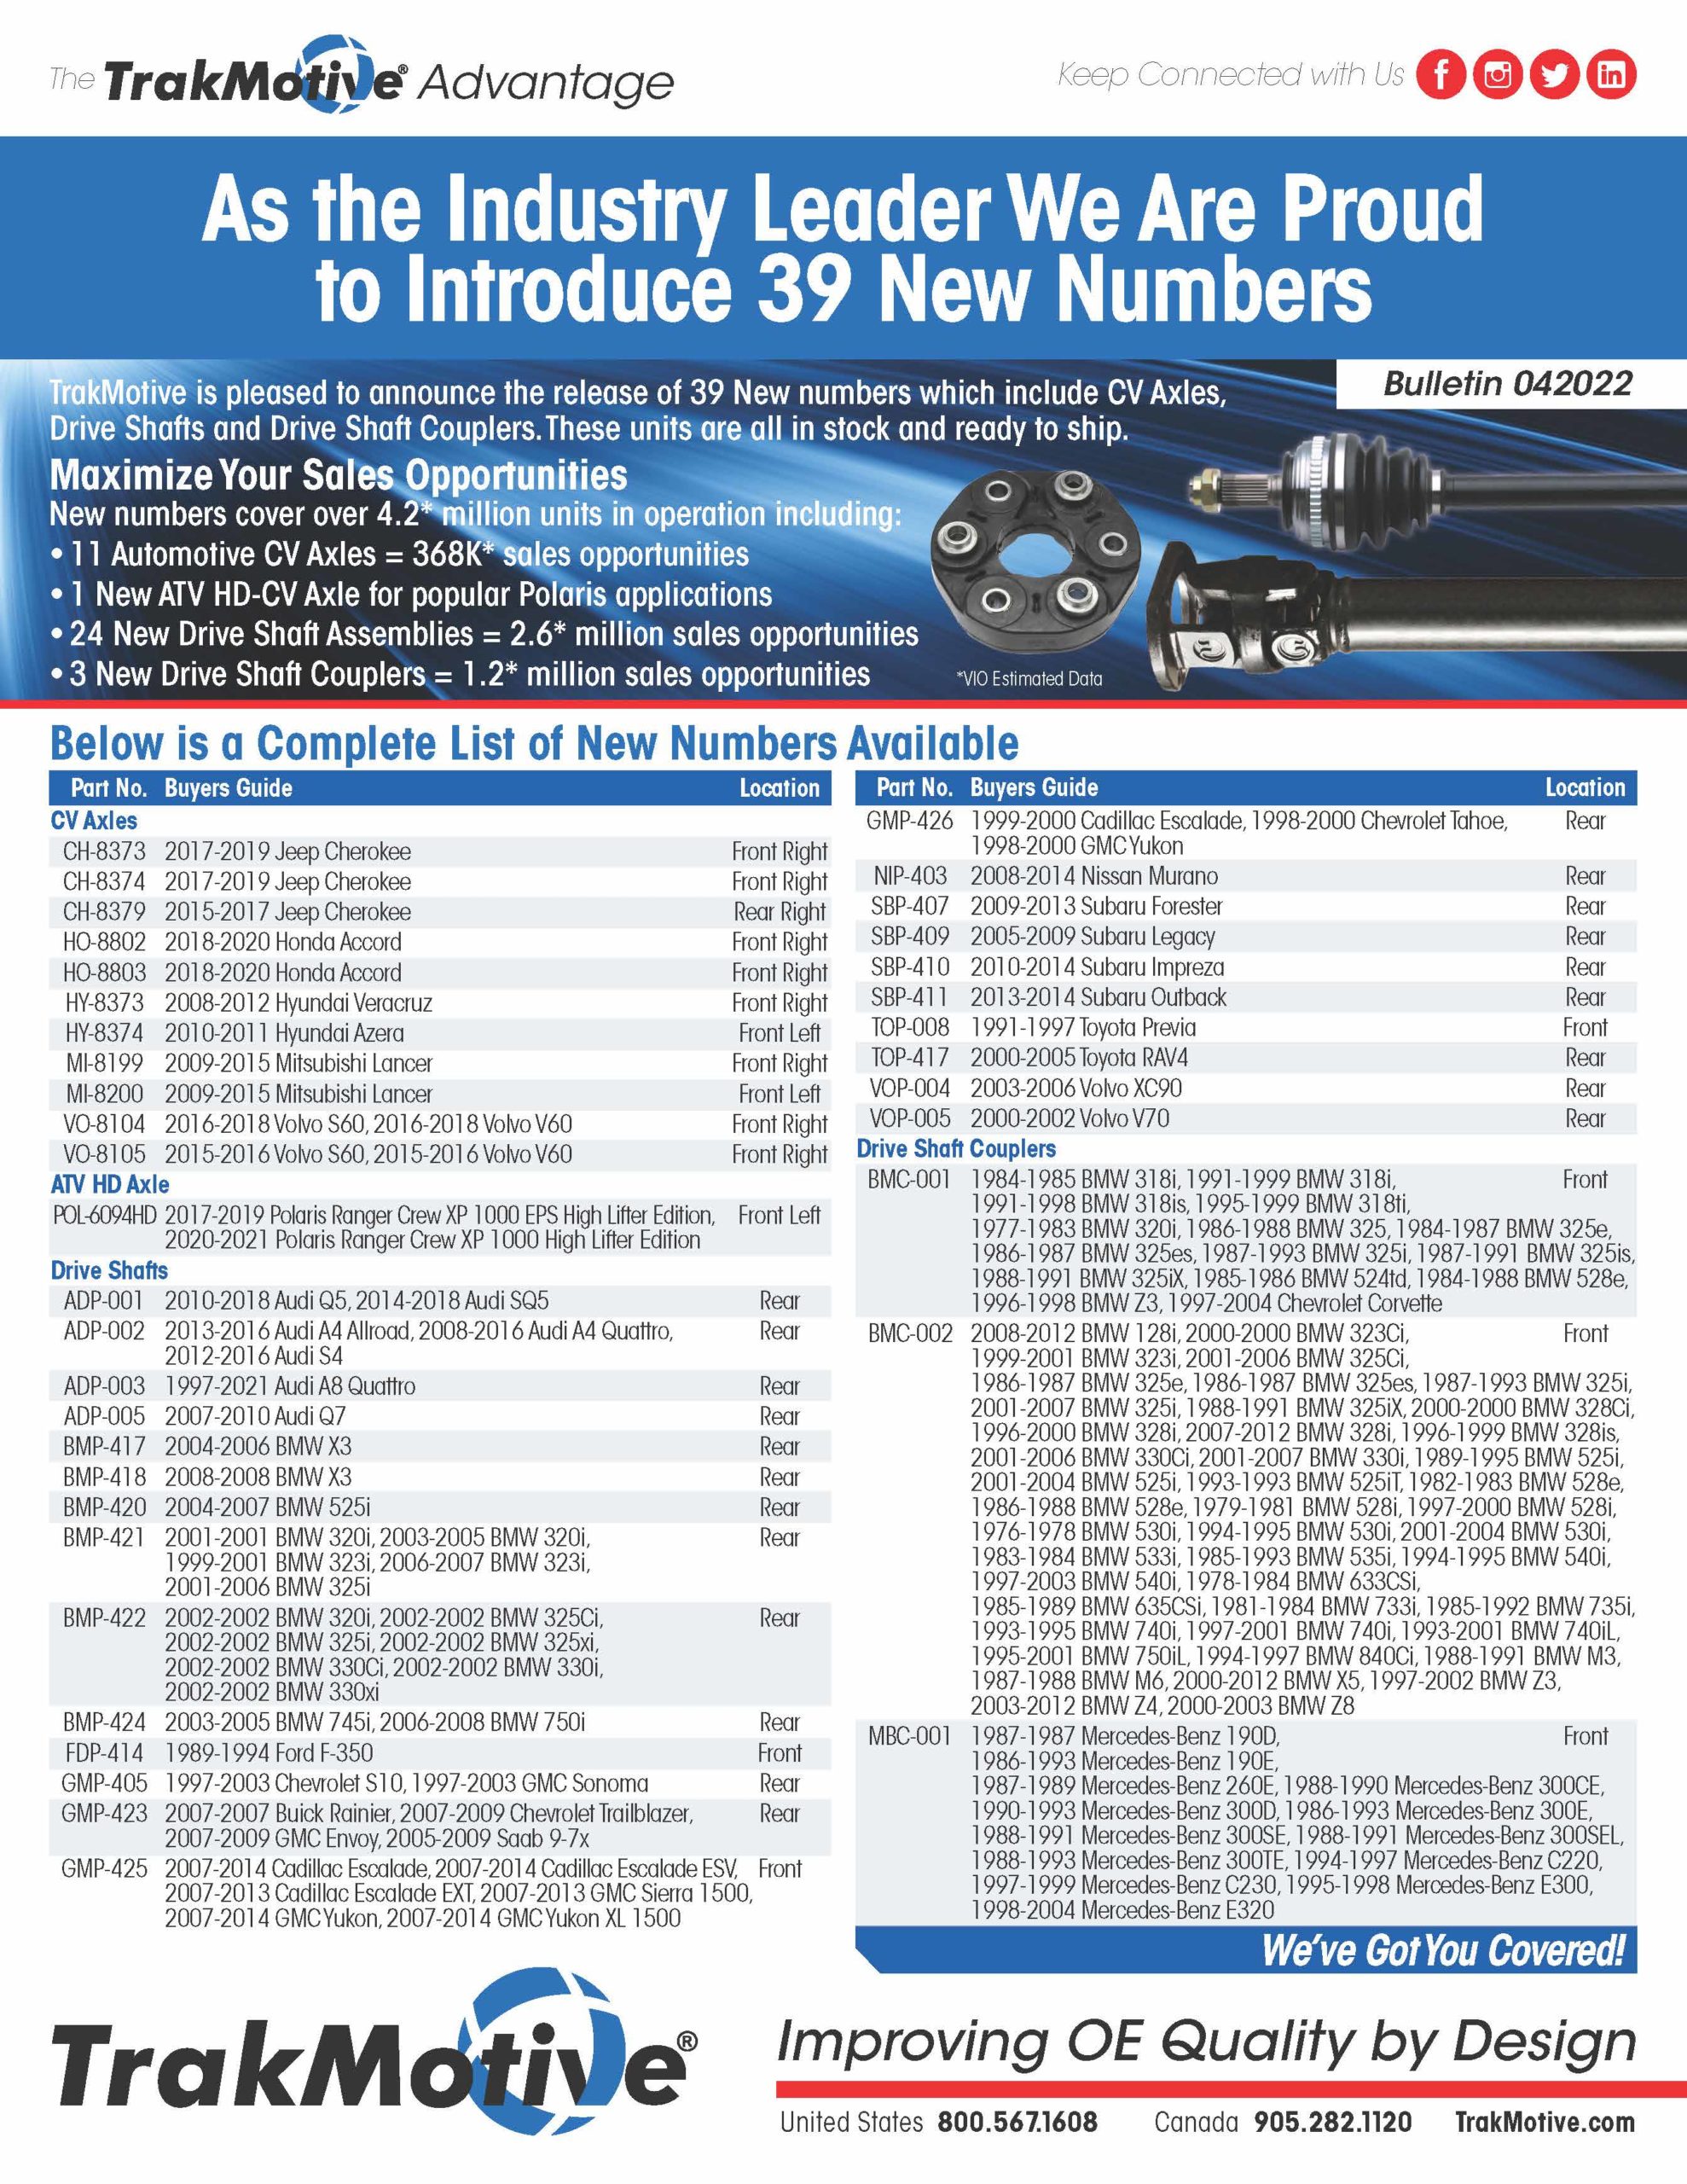 04/2022: TrakMotive Introduces 39 New Numbers